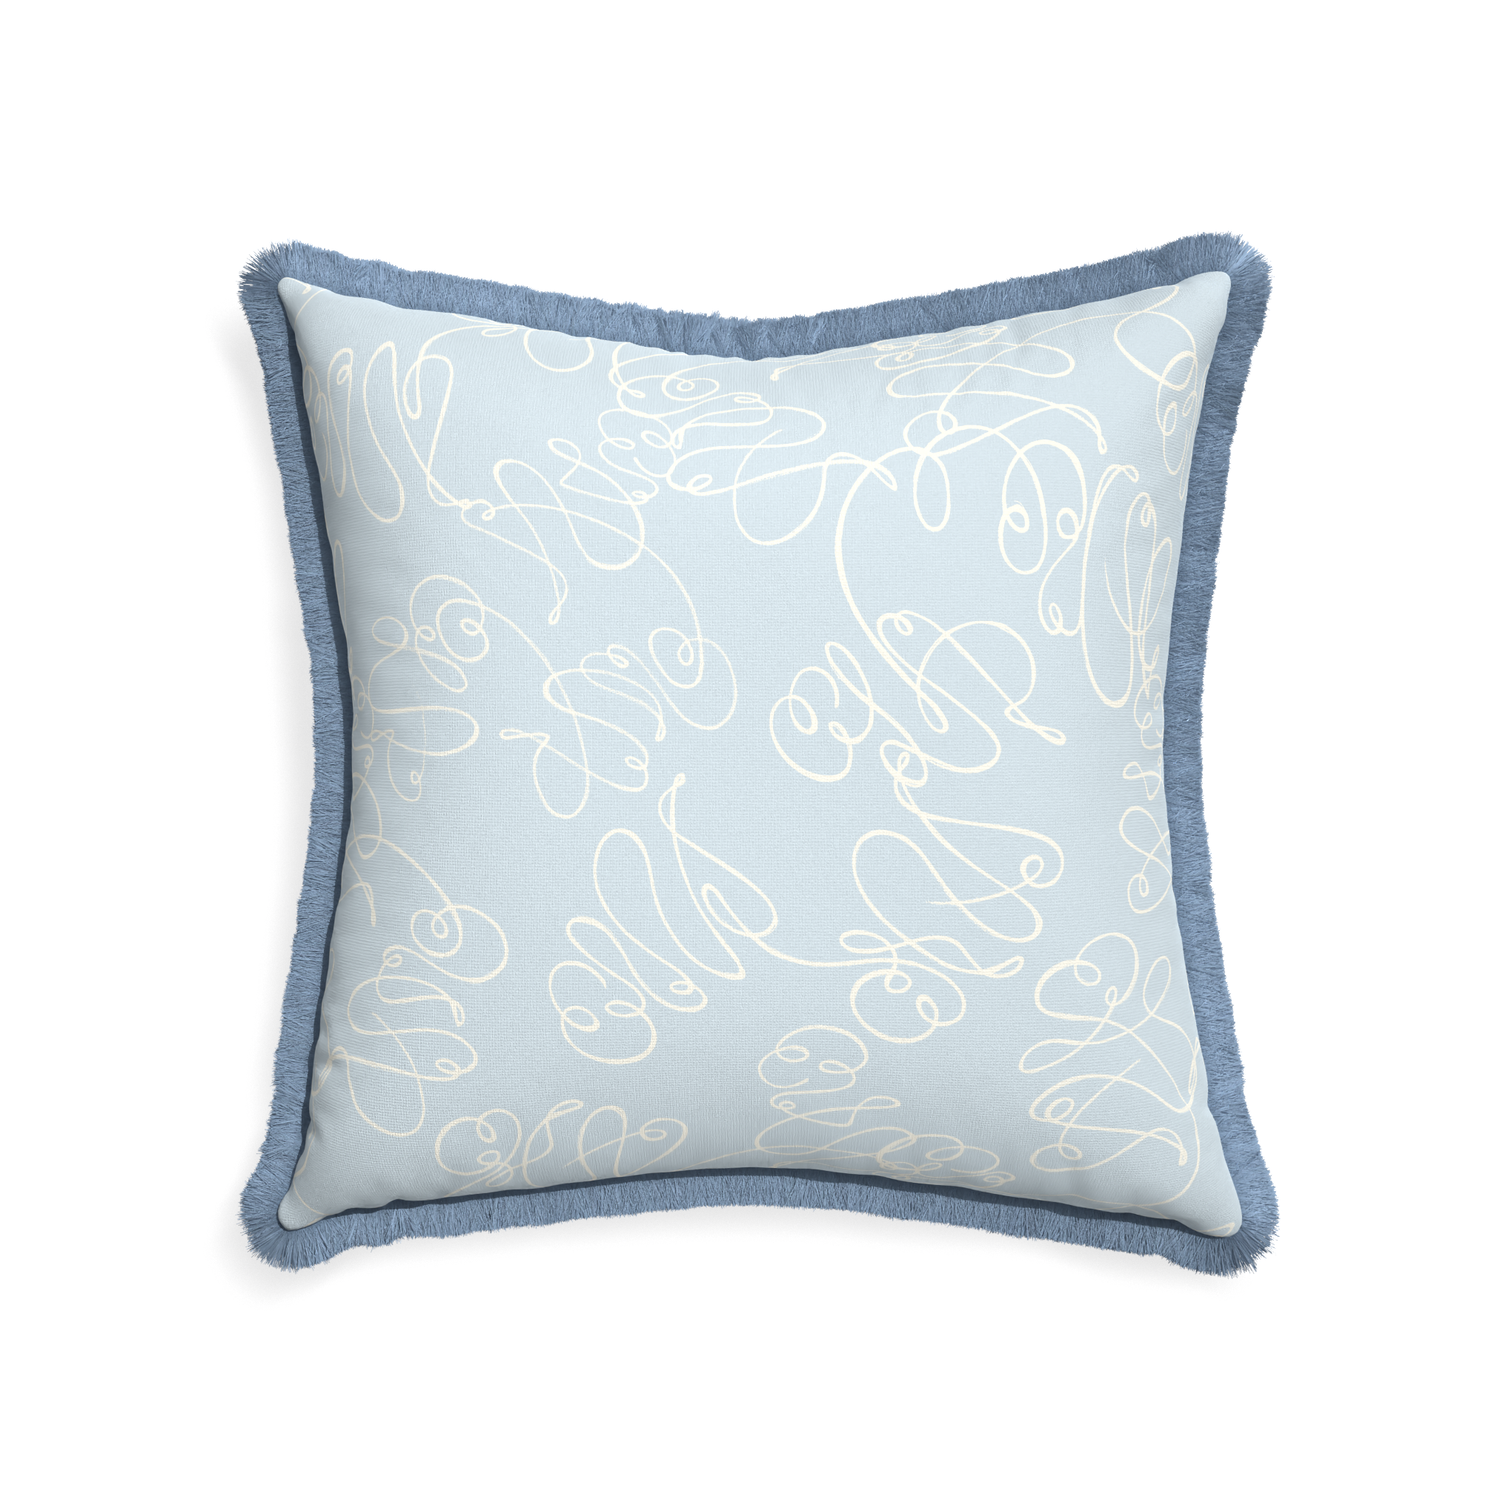 22-square mirabella custom powder blue abstractpillow with sky fringe on white background